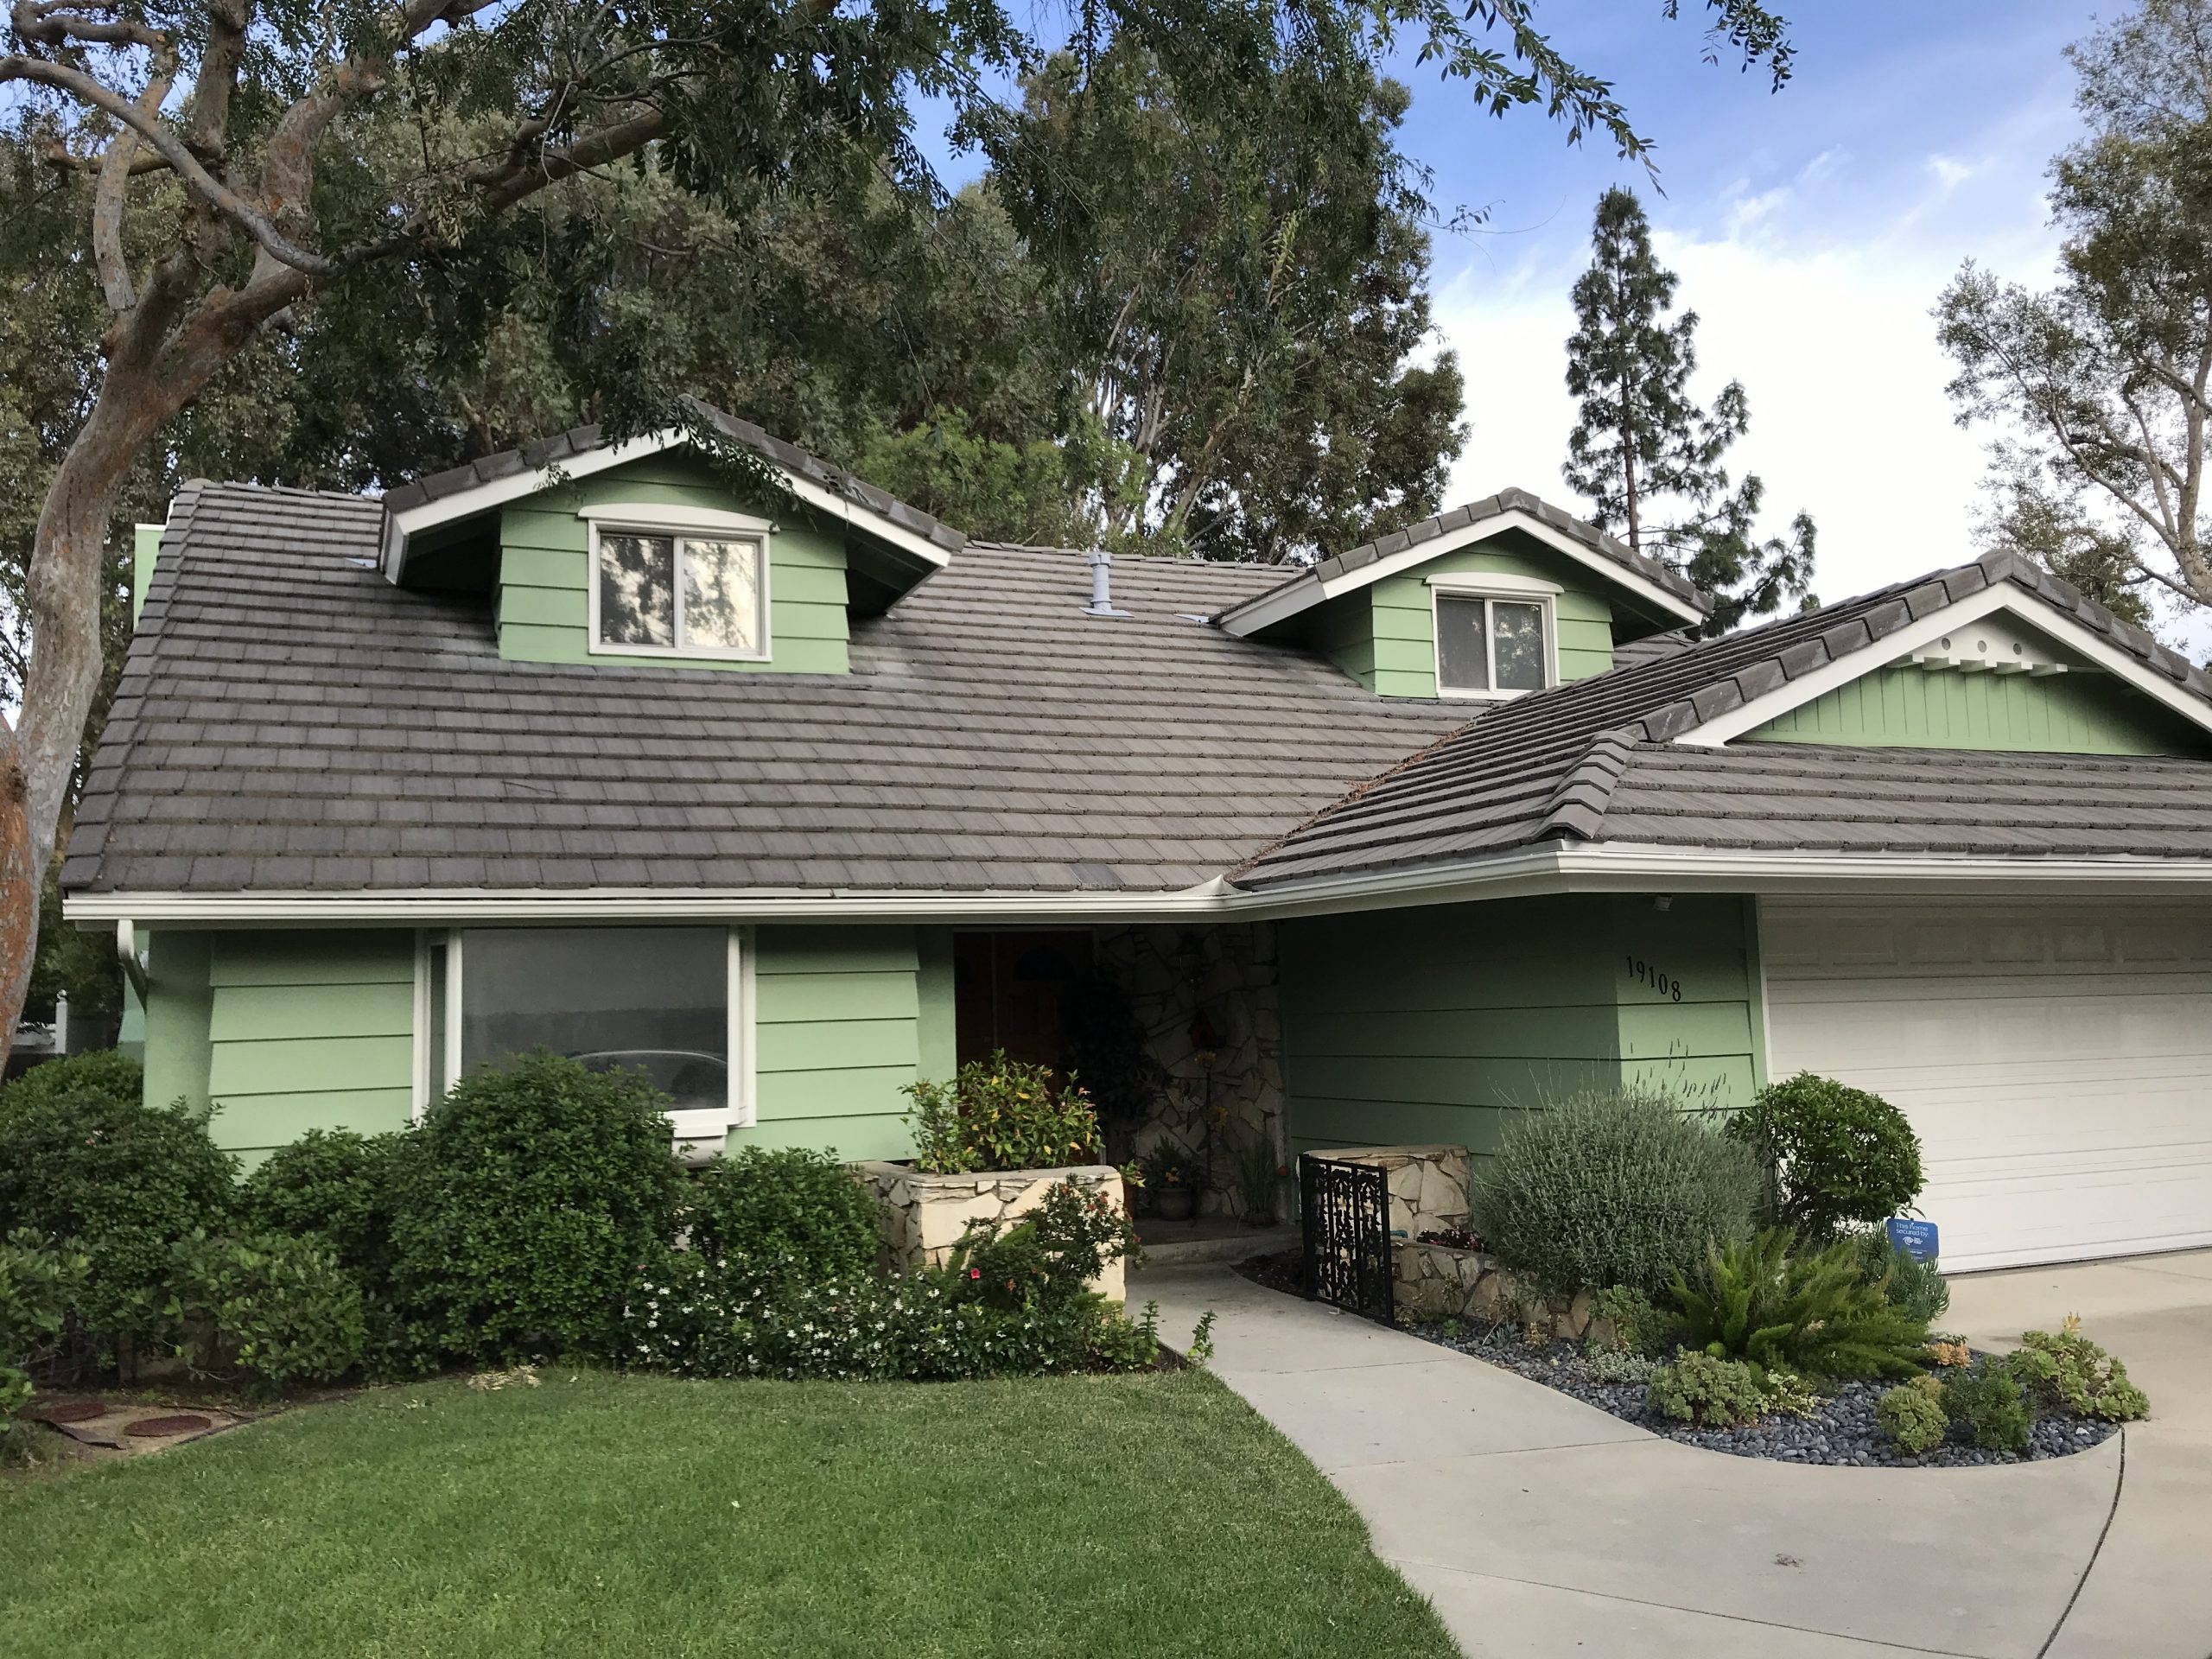 Exterior Paint Projects in Porter Ranch, CA